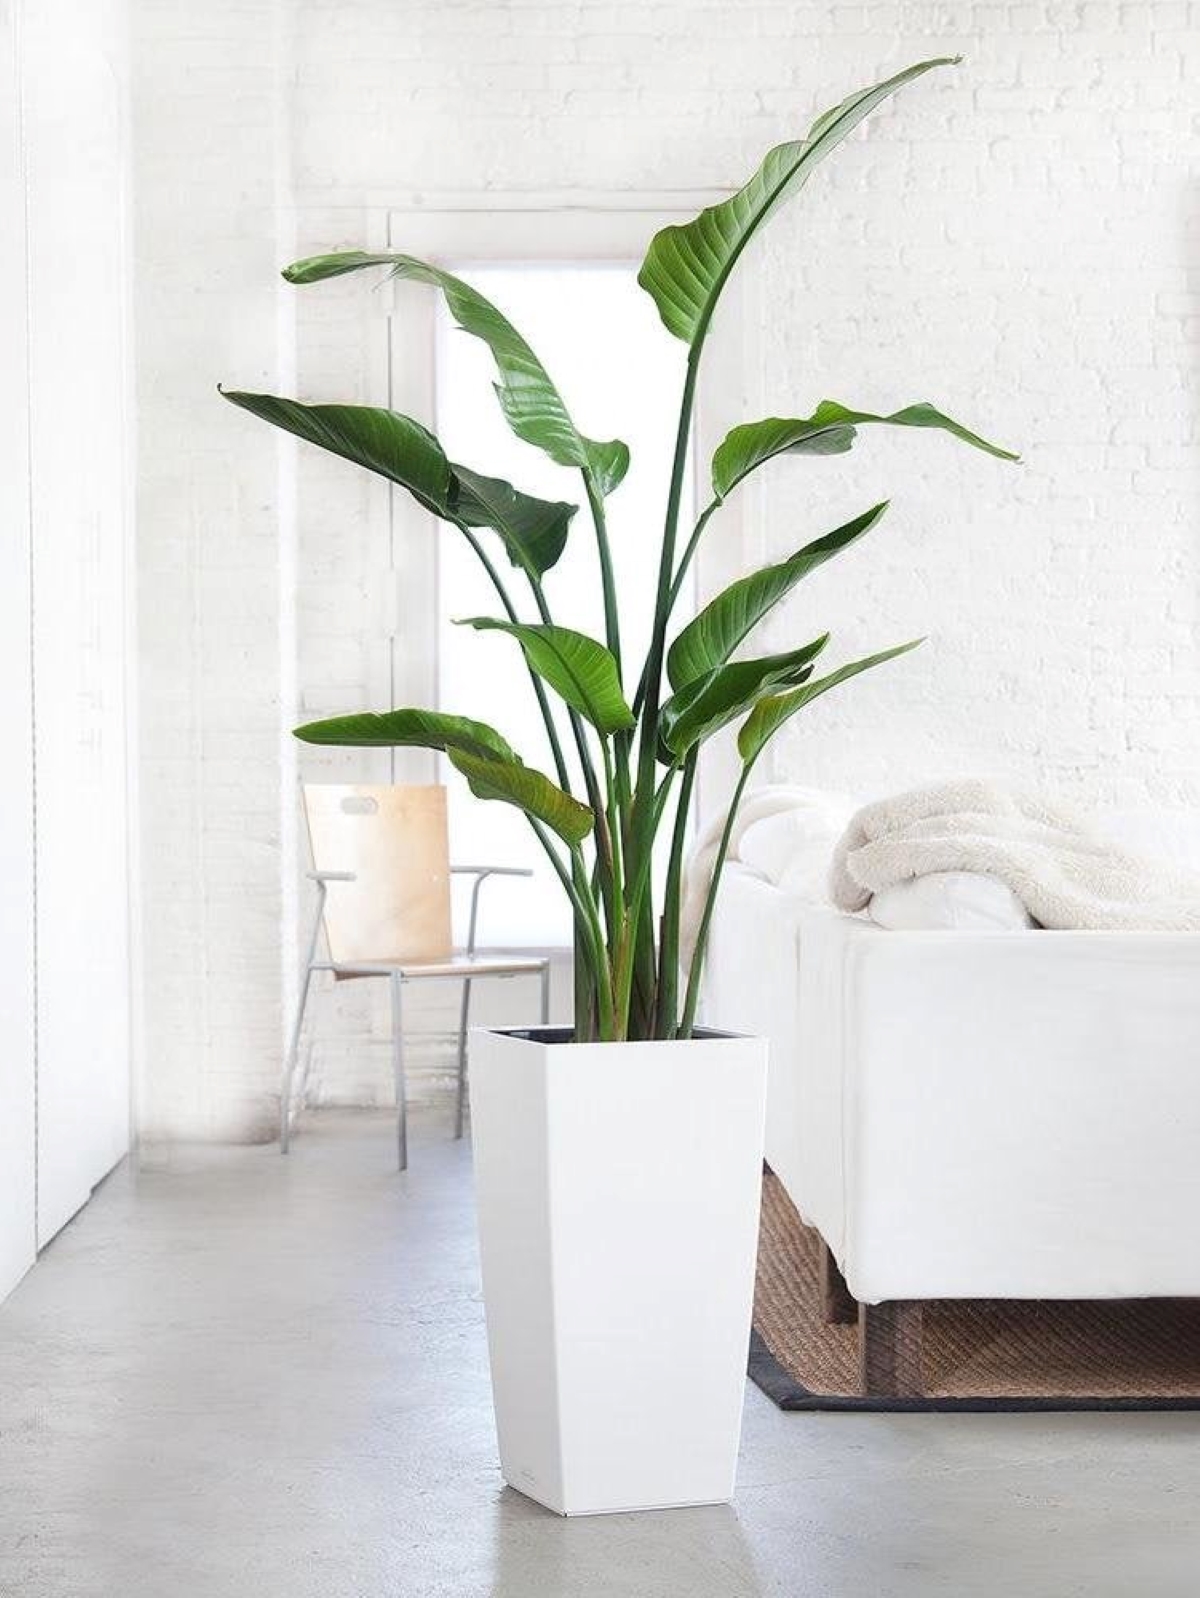 Large green plant in tall white pot